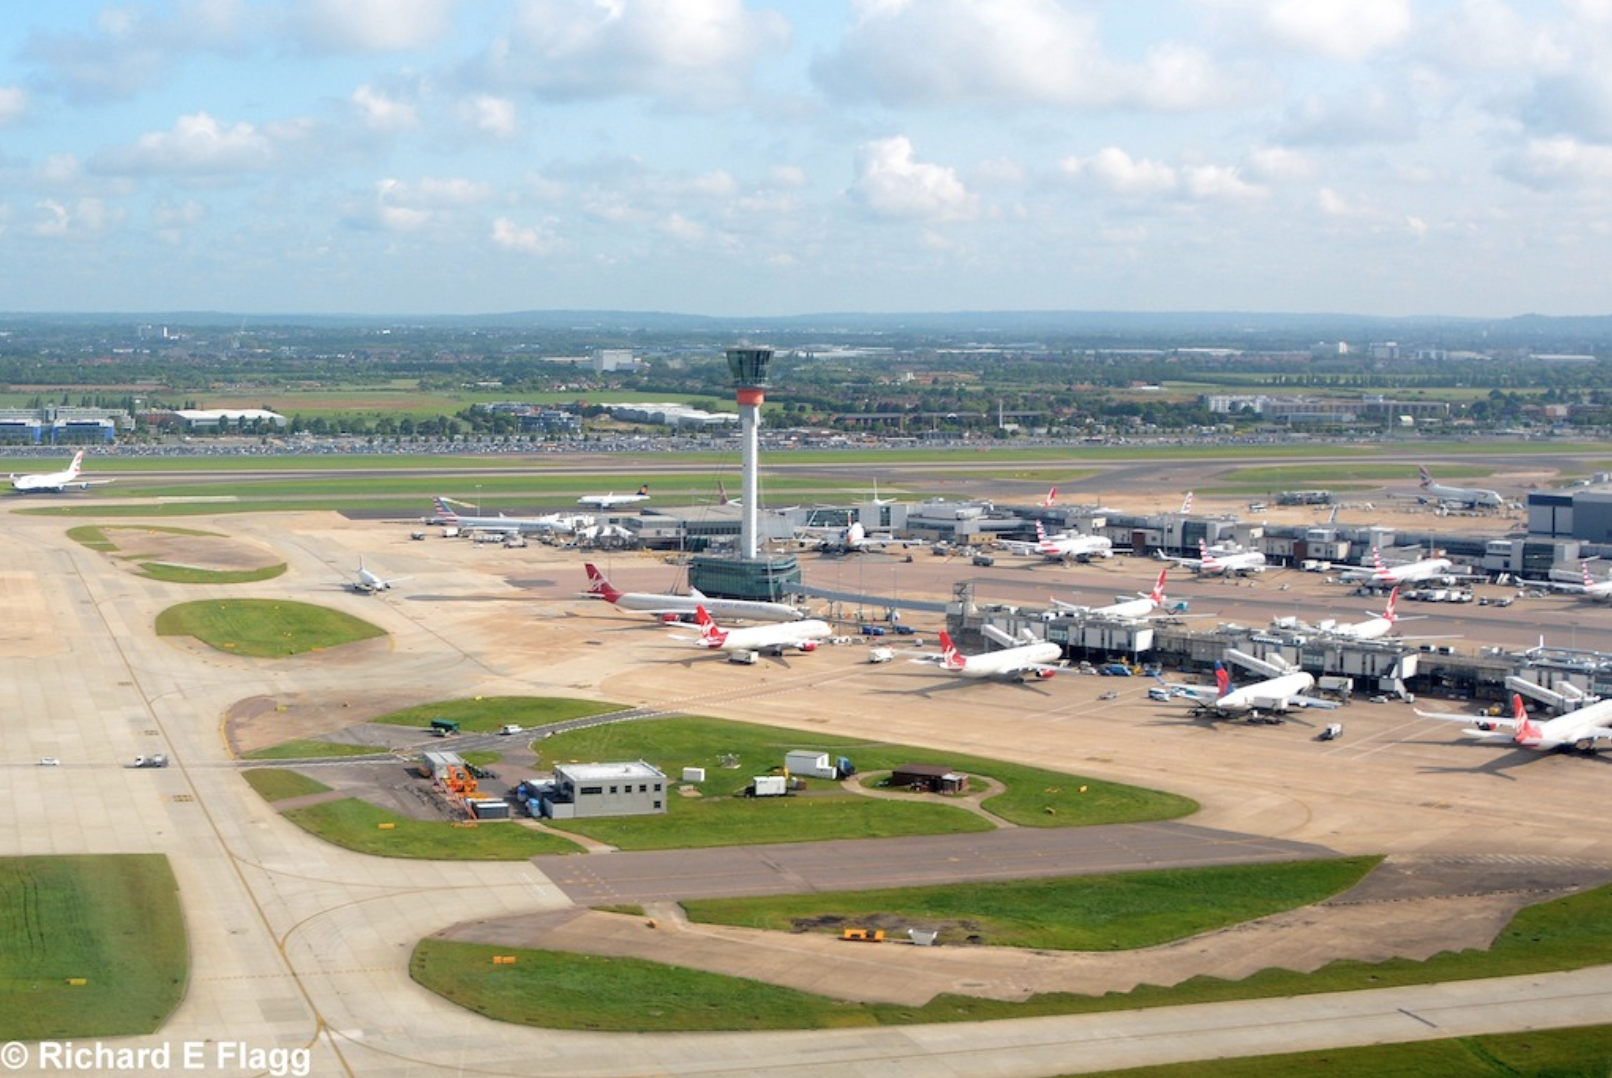 014Aerial View of Heathrow Airport - 22 May 2016.png